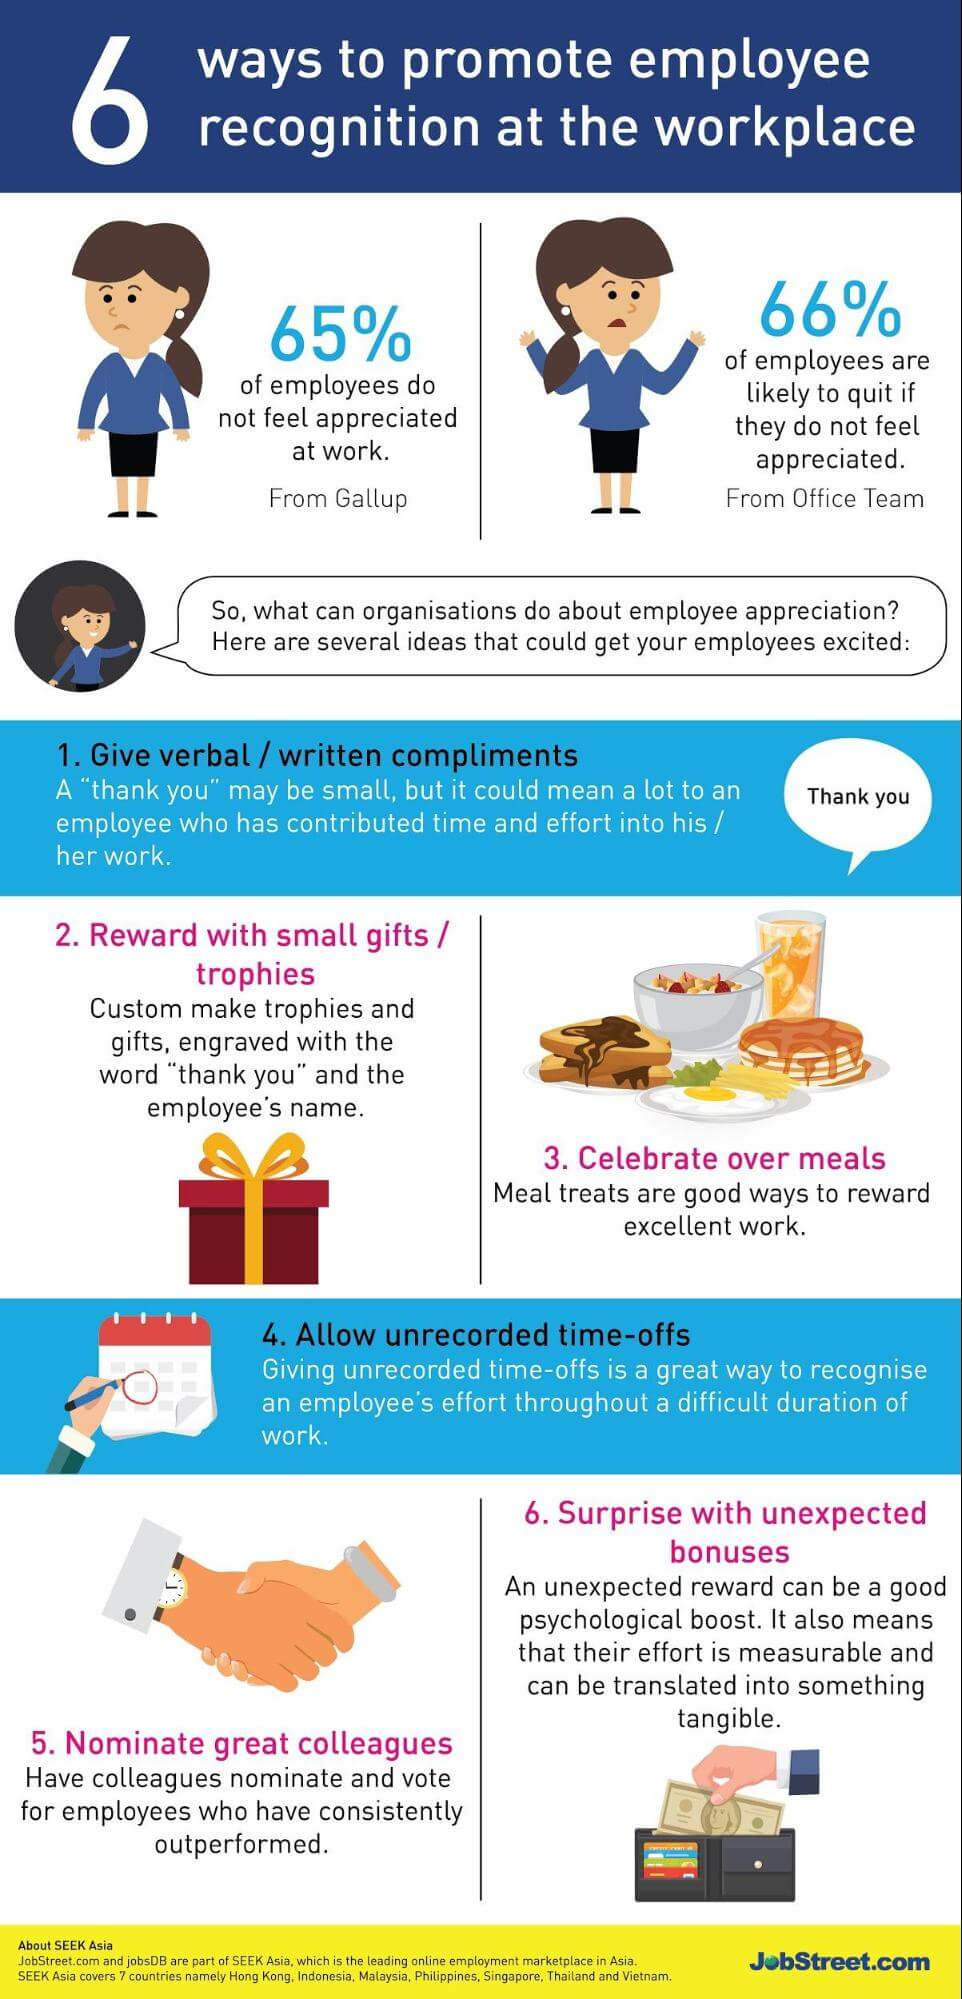 6 Steps to Boost Employee Recognition 73692 1 - 6 Steps to Boost Employee Recognition